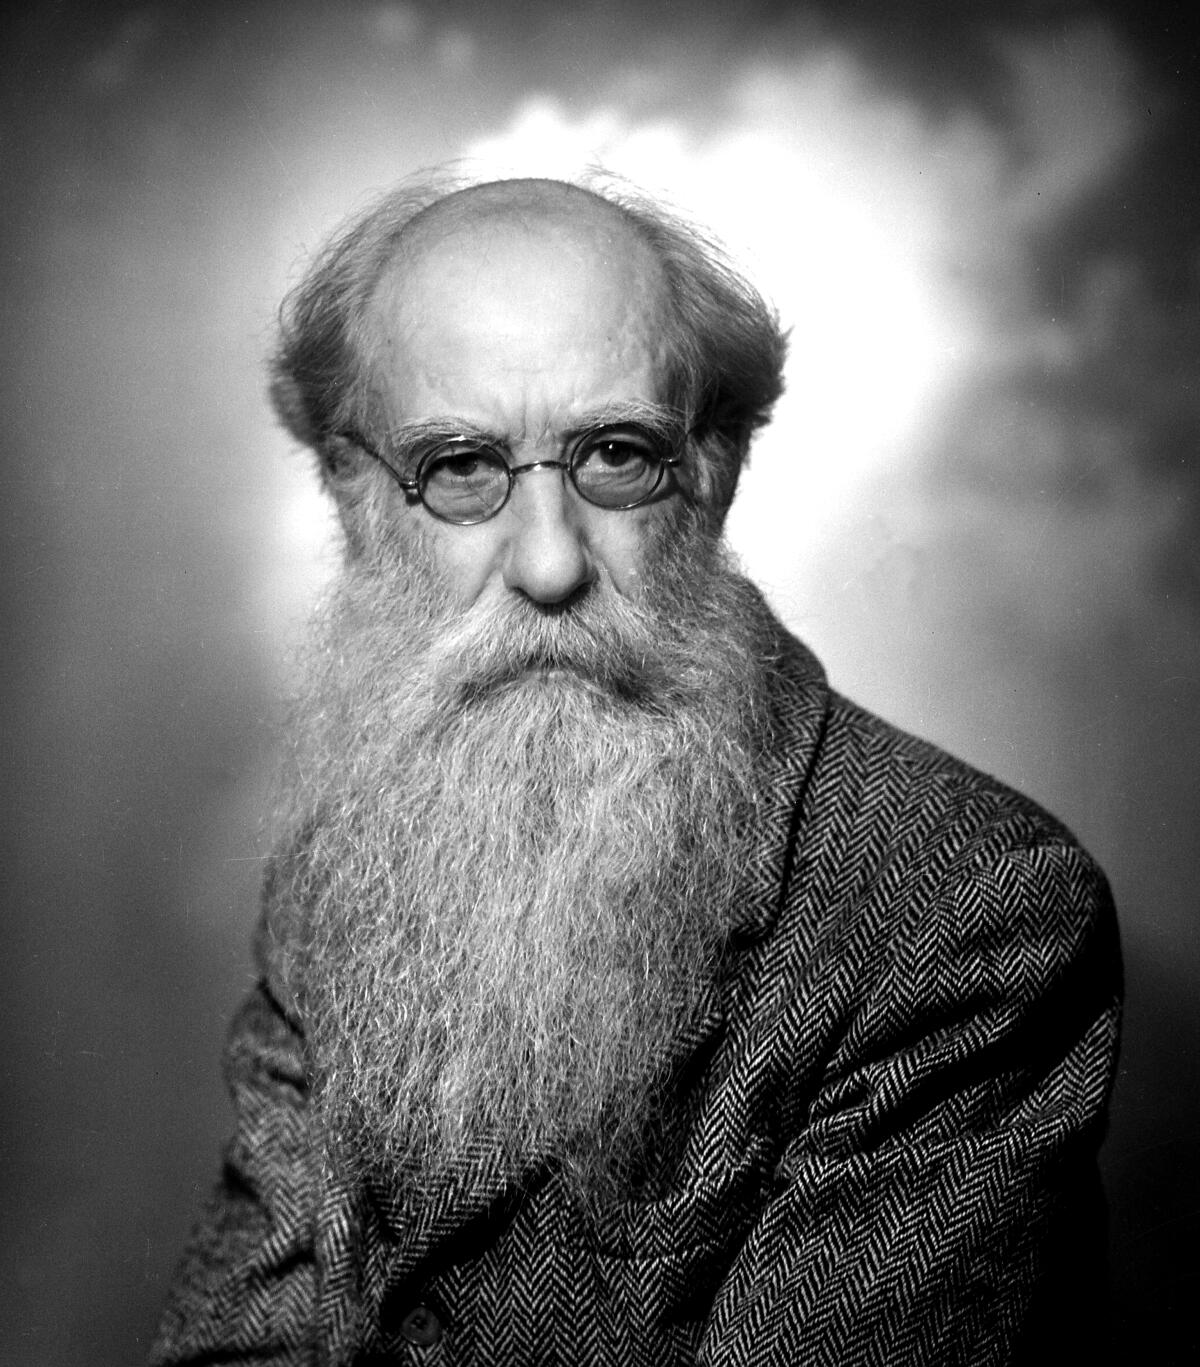 A photo portrait of a balding man with a long white beard and wearing glasses.